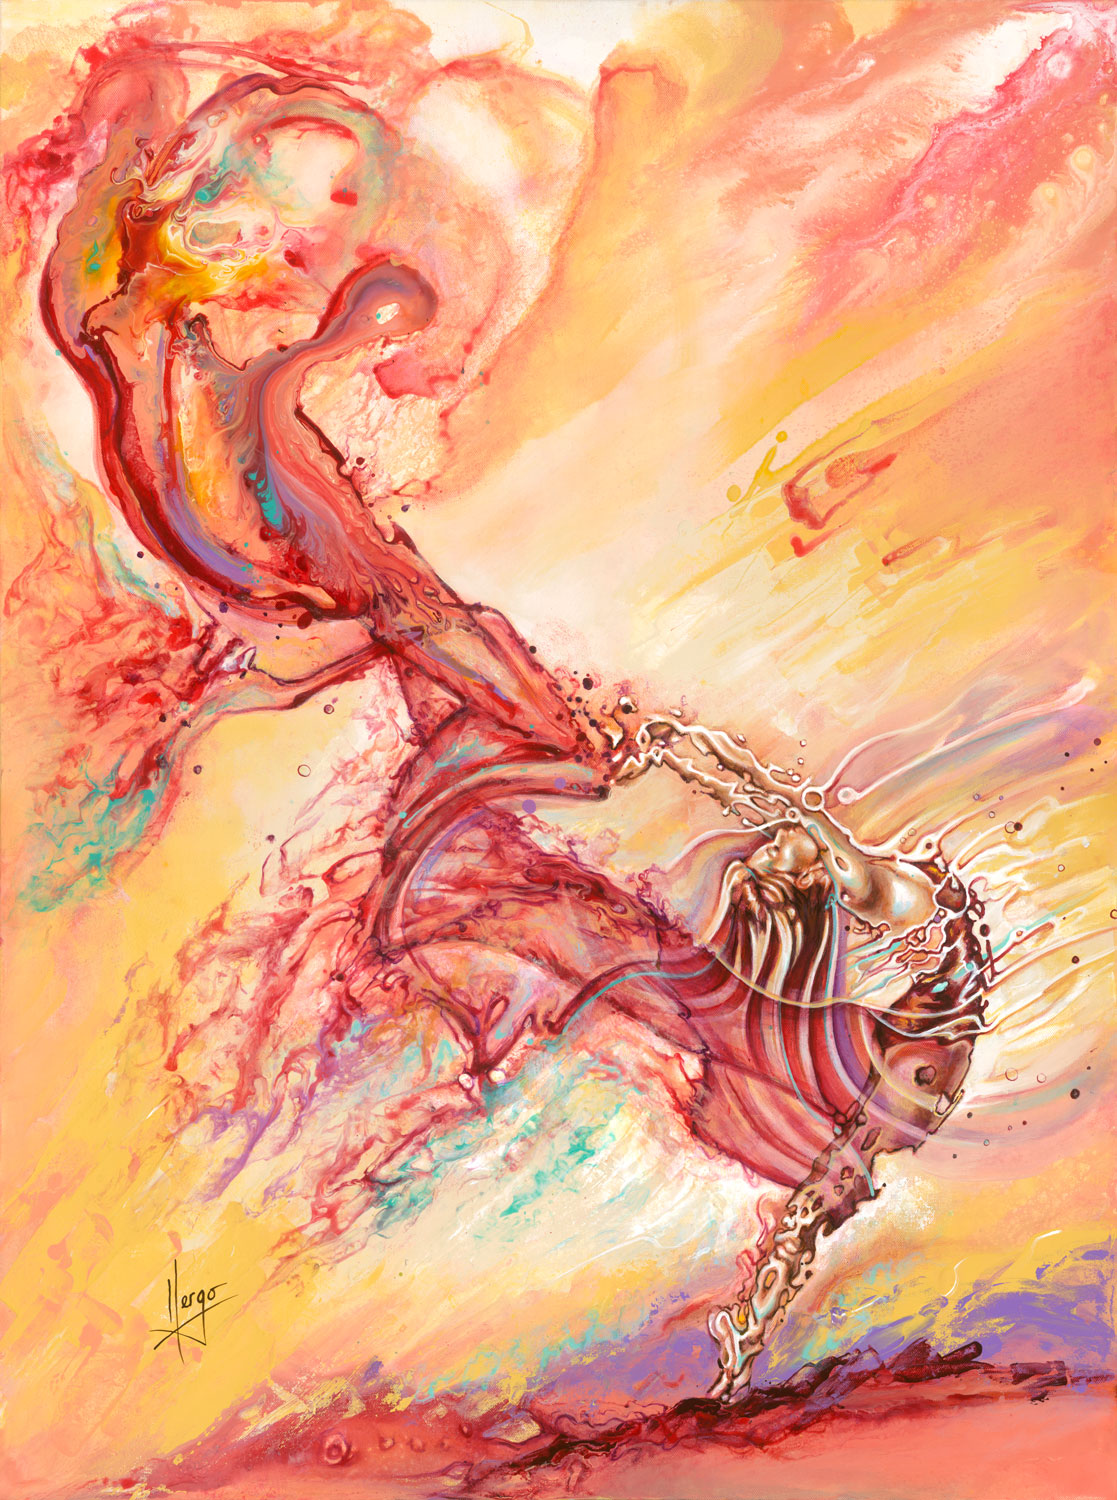 "live forward" woman dancer with red veil colorful painting 